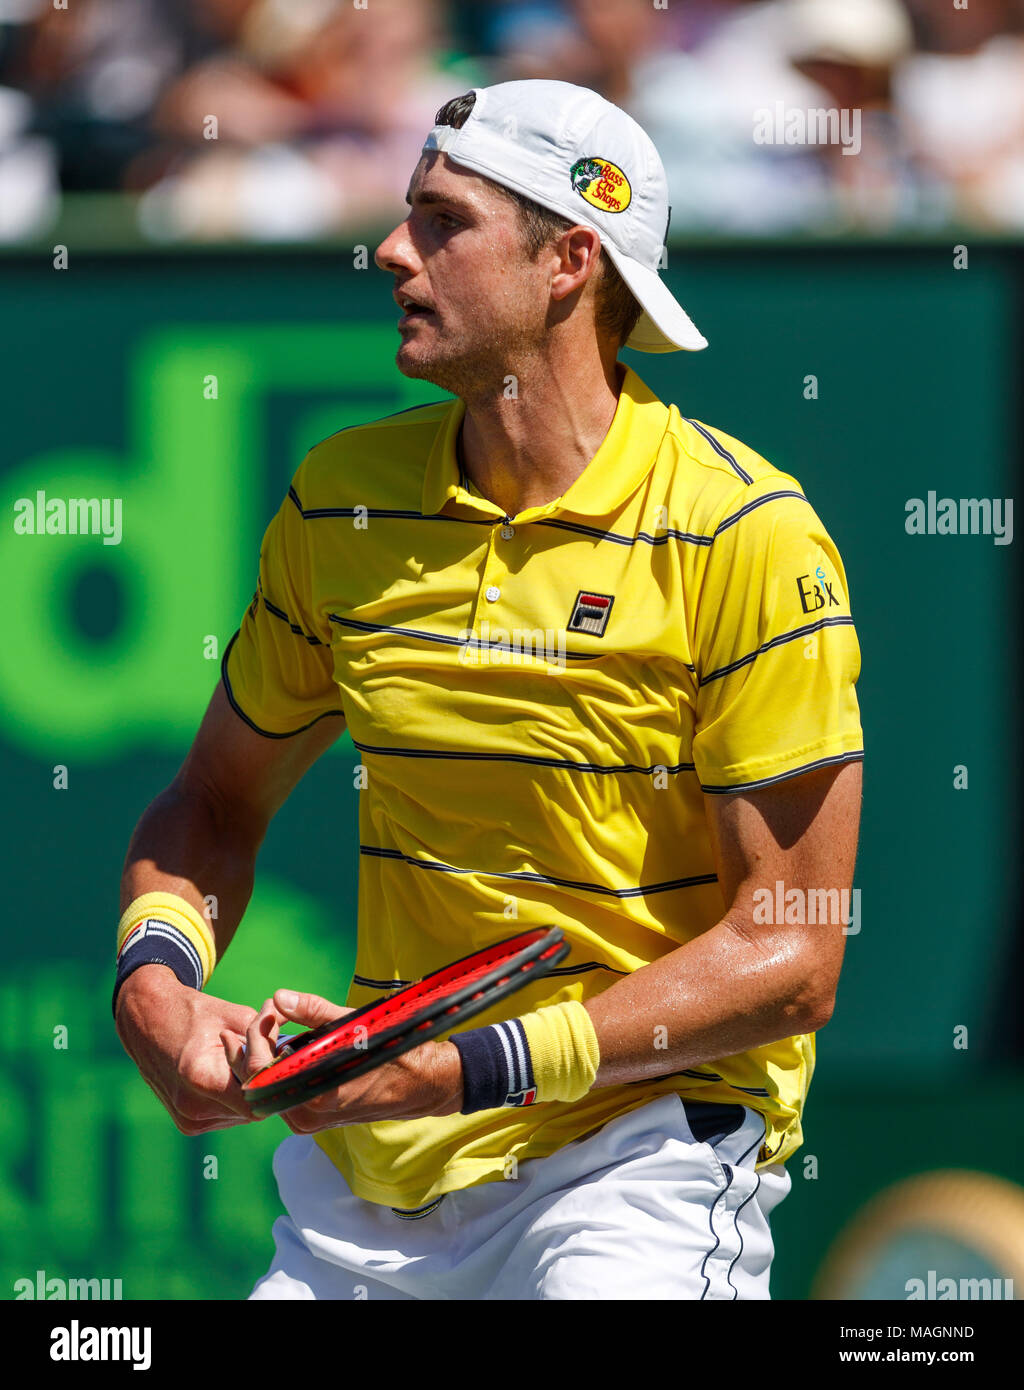 April 01, 2018: John Isner of the United States in action against Alexander Zverev of Germany in the men's single championship final of the 2018 Miami Open presented by Itau professional tennis tournament, played at the Crandon Park Tennis Center in Key Biscayne, Florida, USA. Isner won 6-7(4), 6-4, 6-4. Mario Houben/CSM. Stock Photo